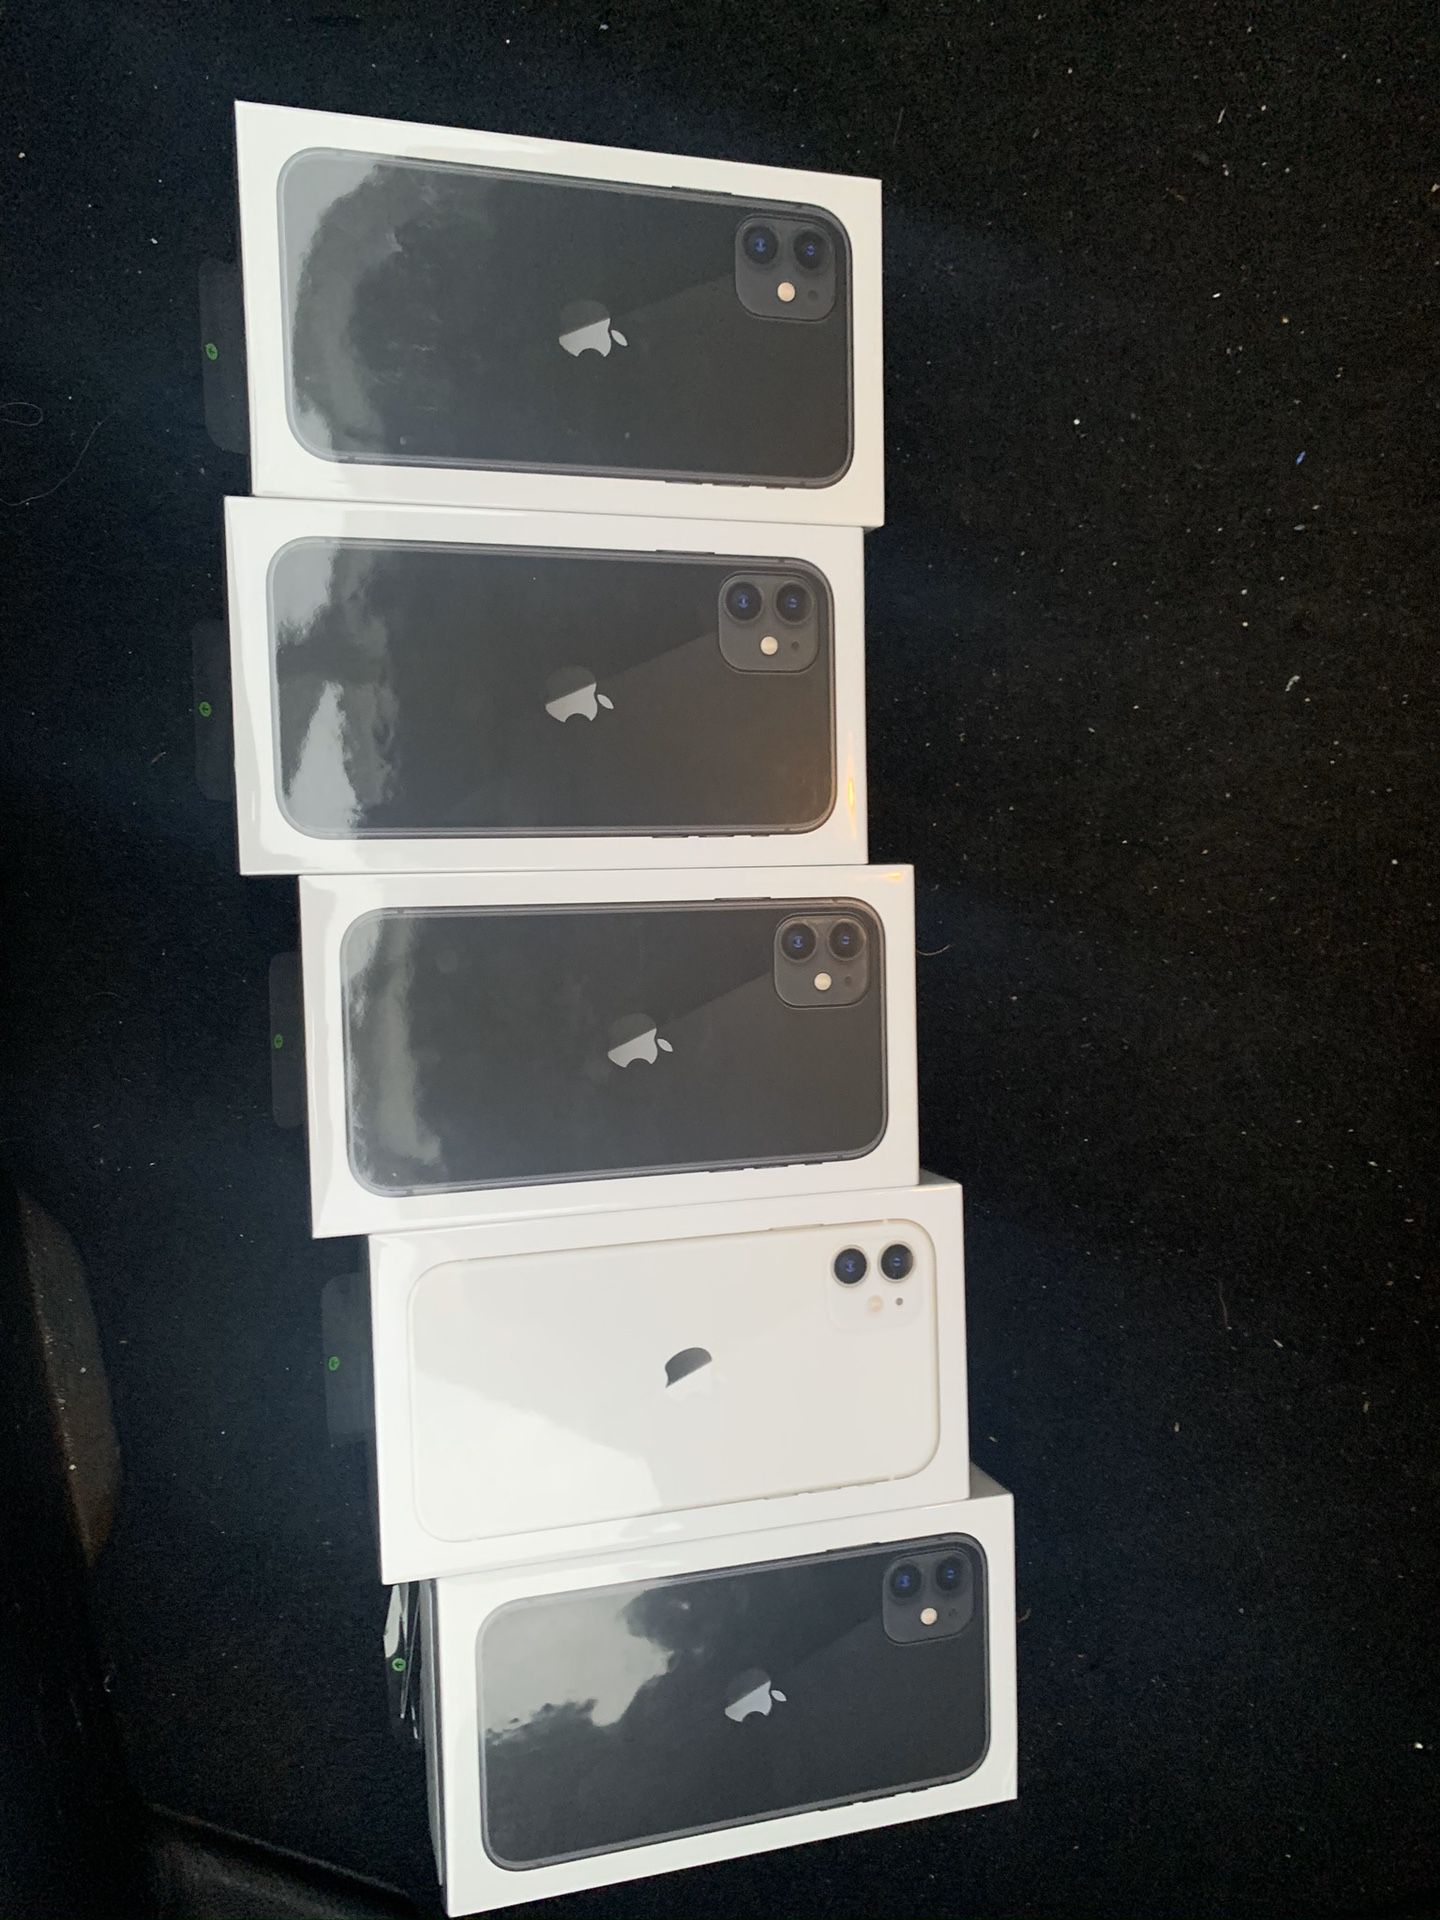 Iphone 11 64gb price is firm